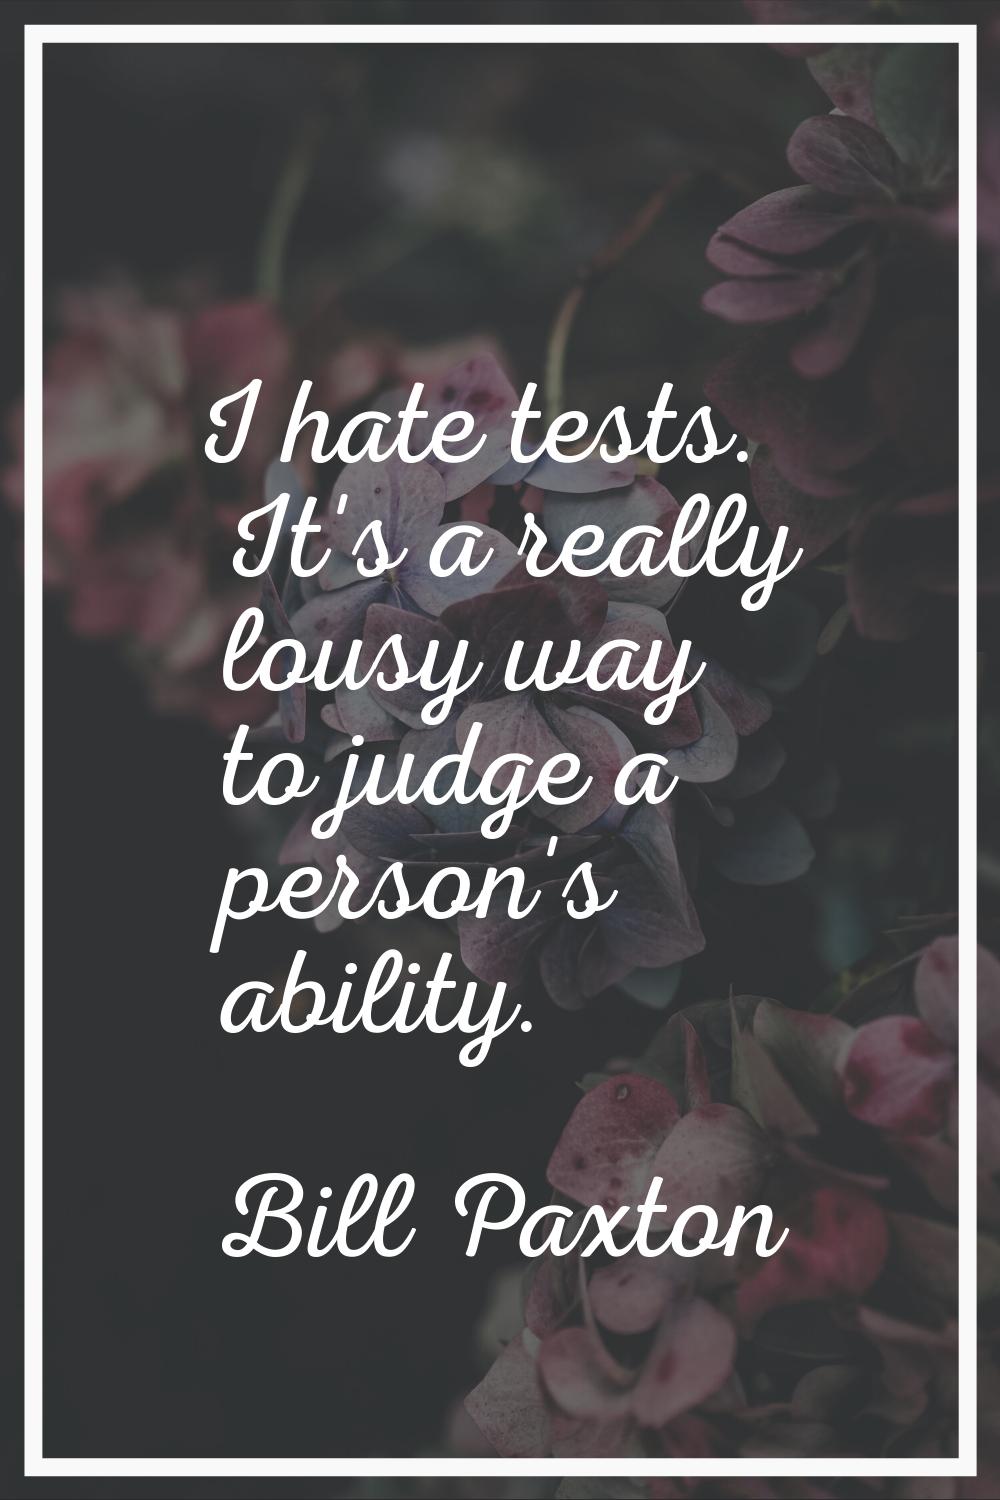 I hate tests. It's a really lousy way to judge a person's ability.